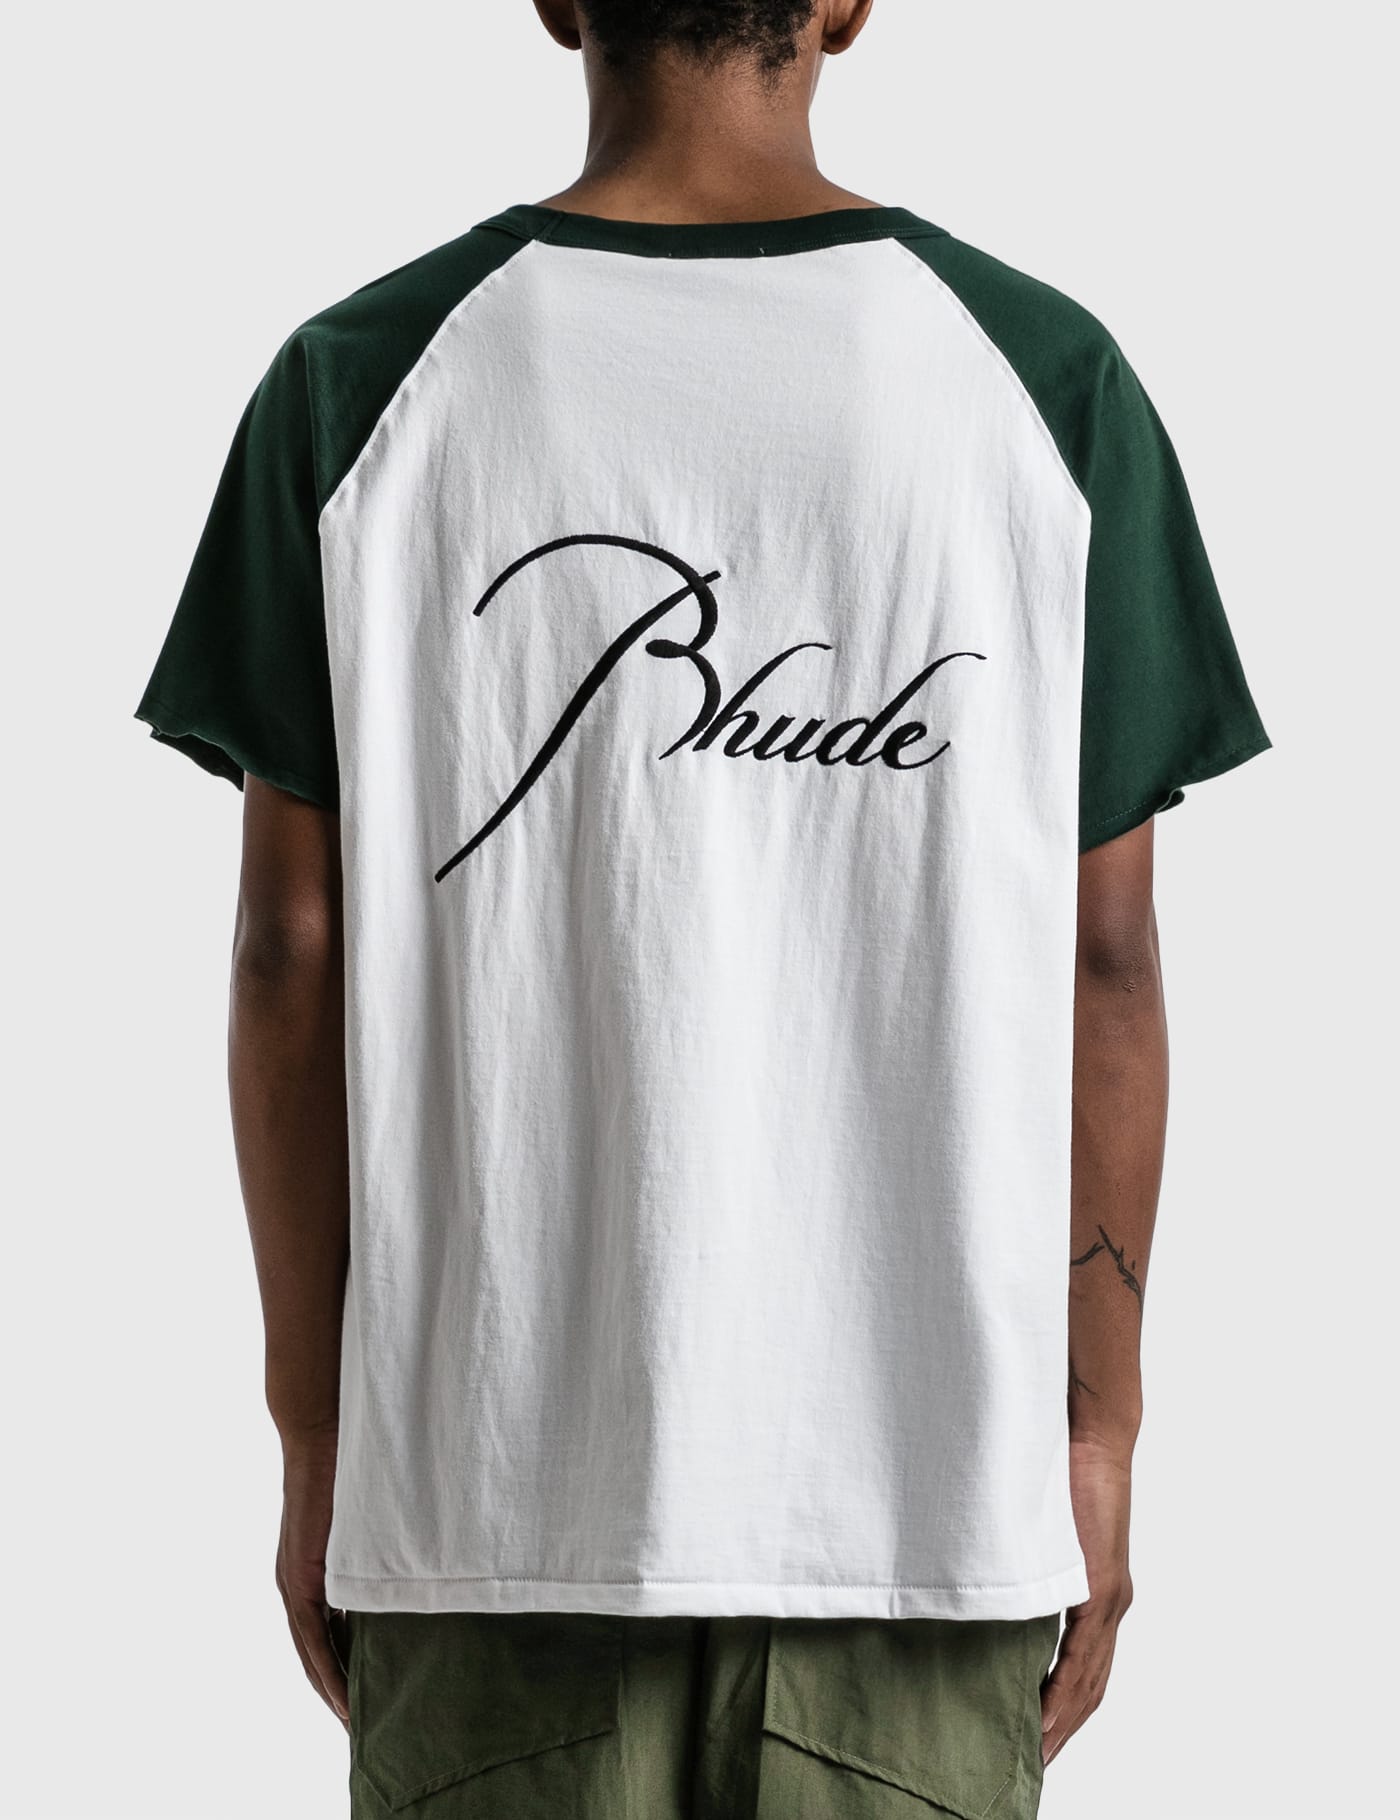 Rhude - Raglan T-shirt | HBX - Globally Curated Fashion and Lifestyle by  Hypebeast